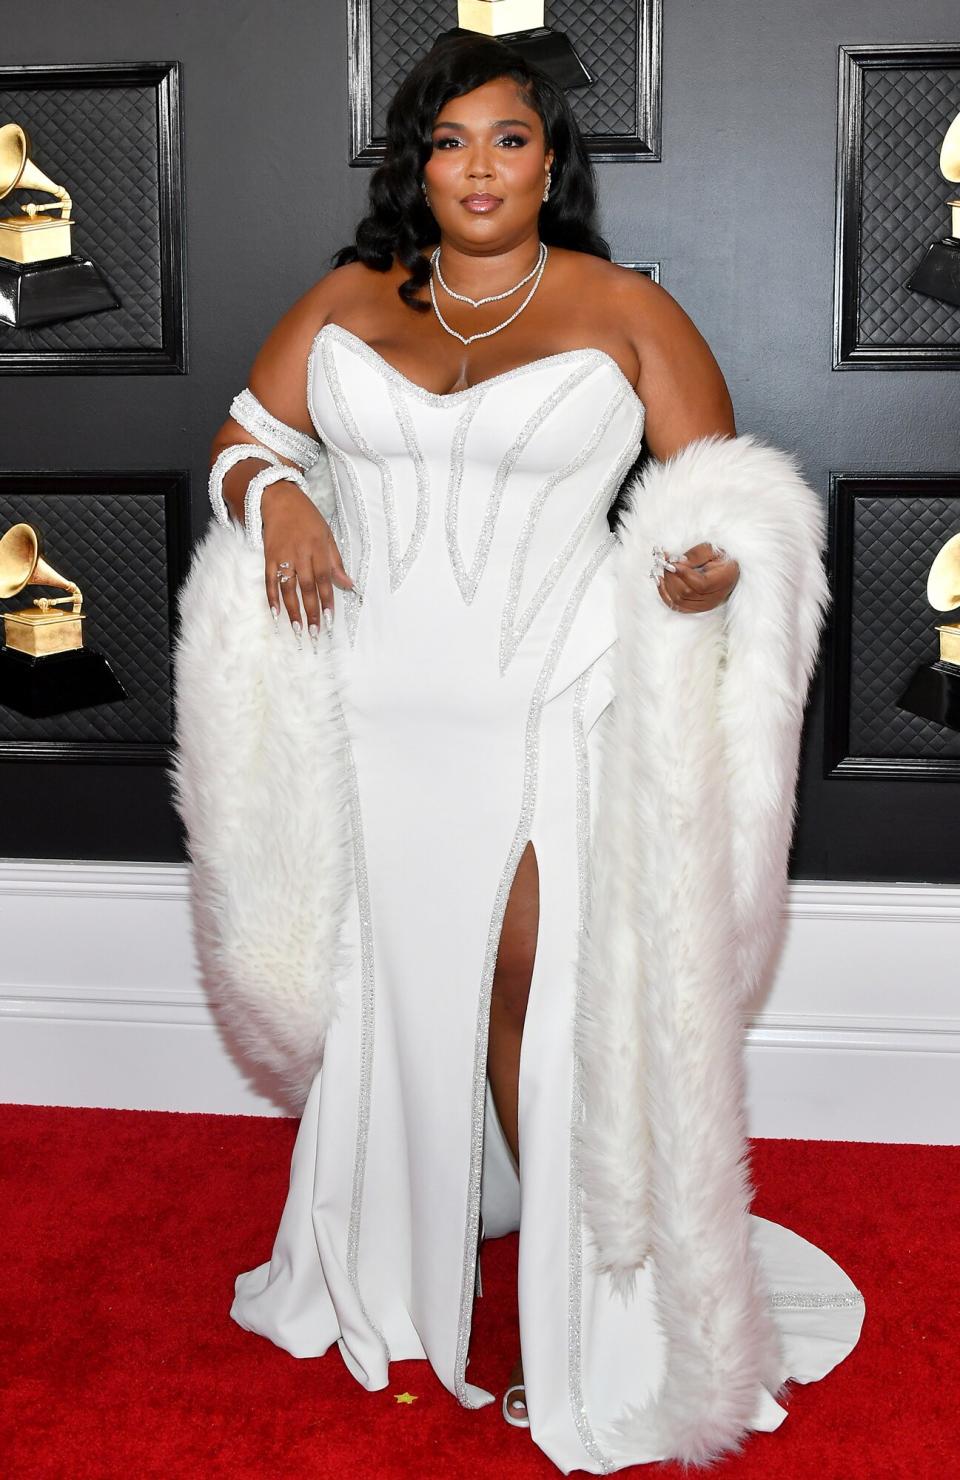 Lizzo attends the 62nd Annual GRAMMY Awards at Staples Center on January 26, 2020 in Los Angeles, California